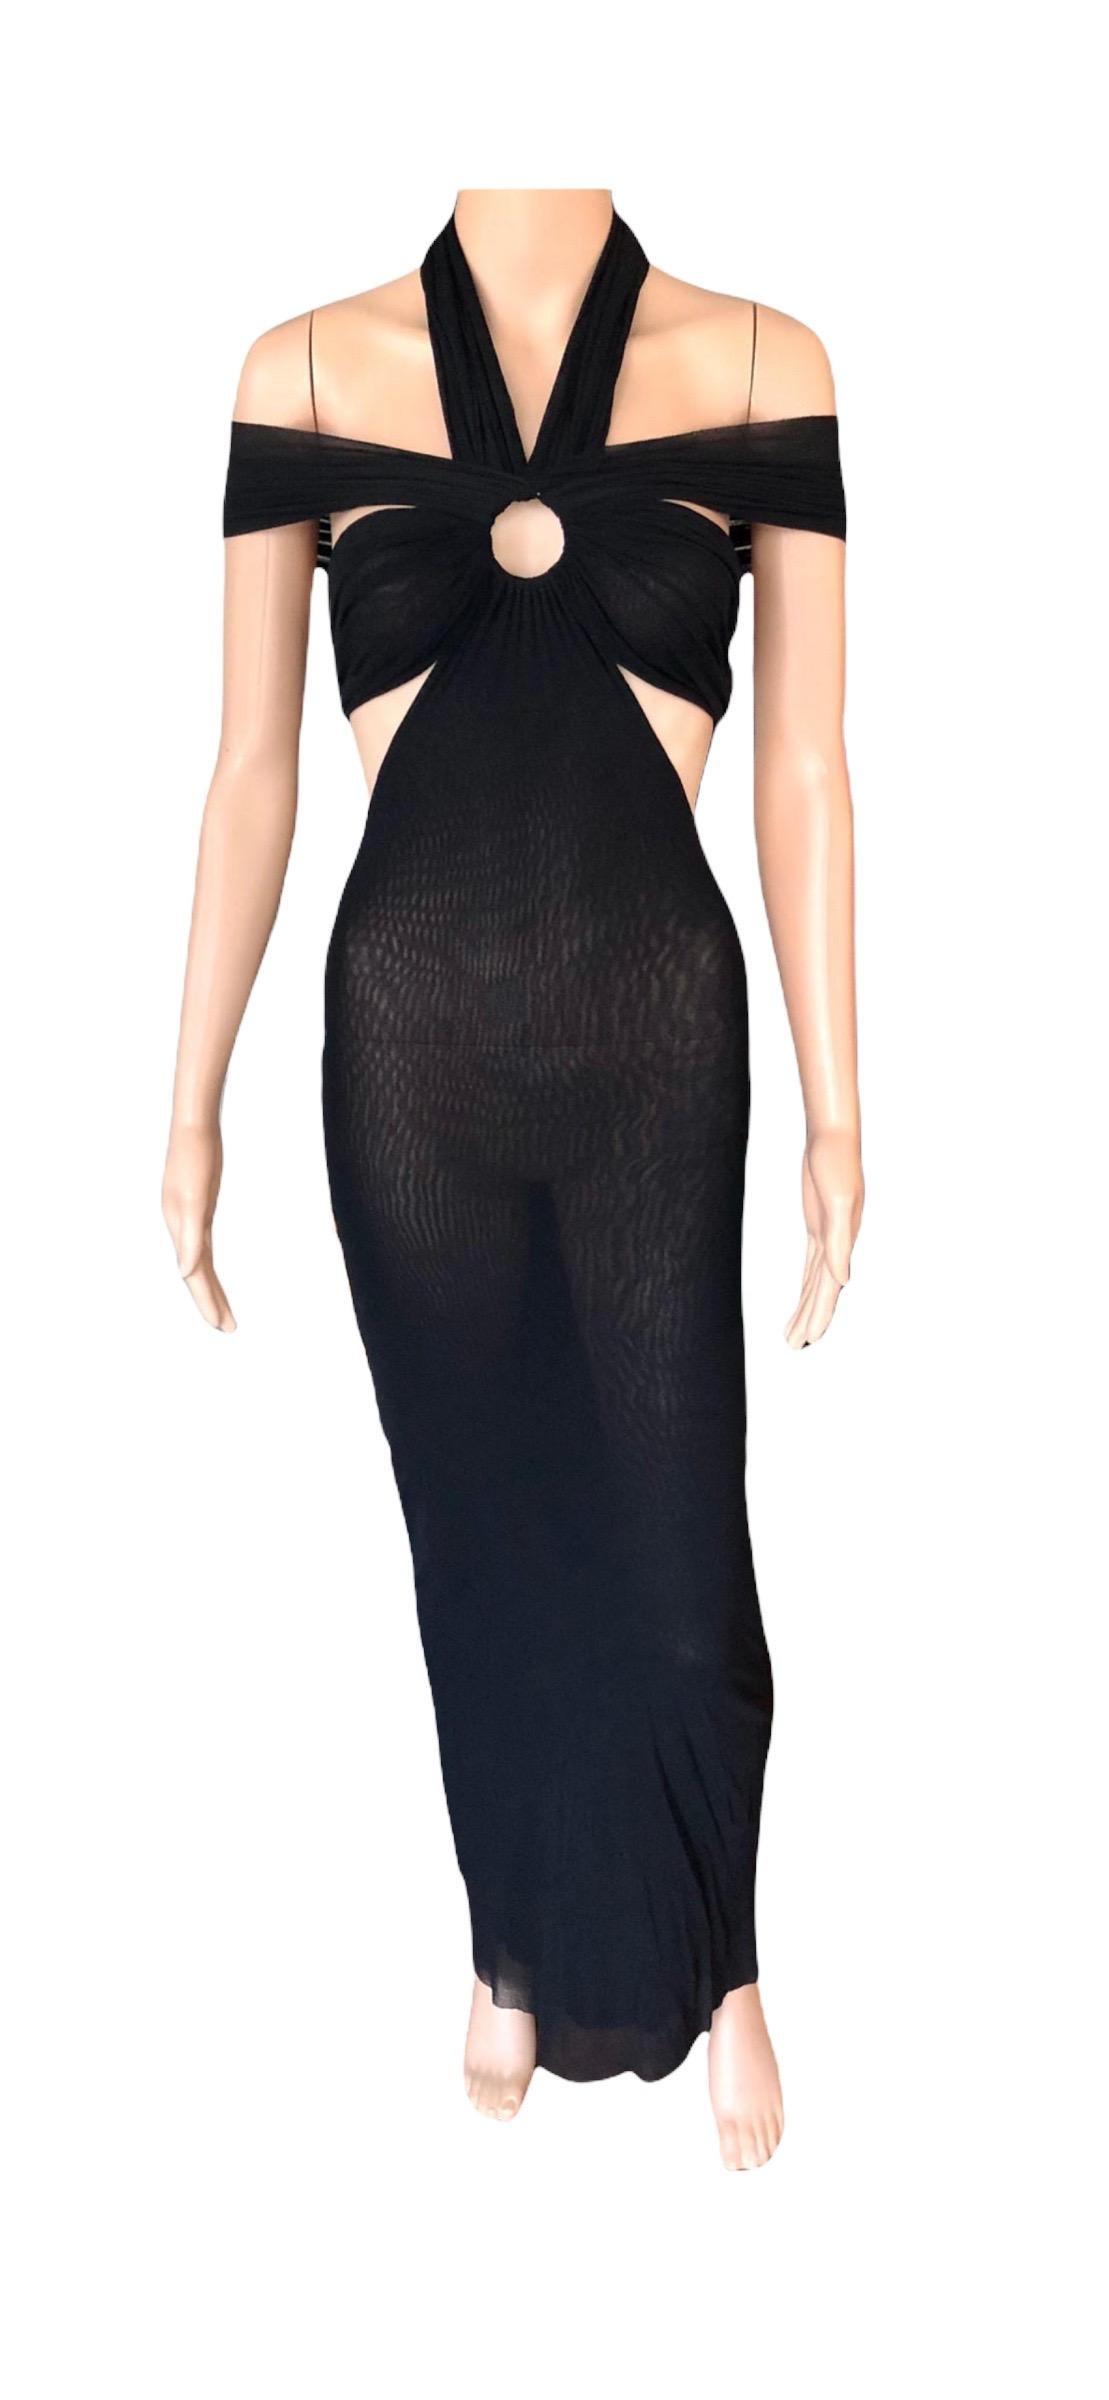 Jean Paul Gaultier Soleil S/S 1999 Cutout Sheer Mesh Bodycon Black Maxi Dress In Good Condition For Sale In Naples, FL